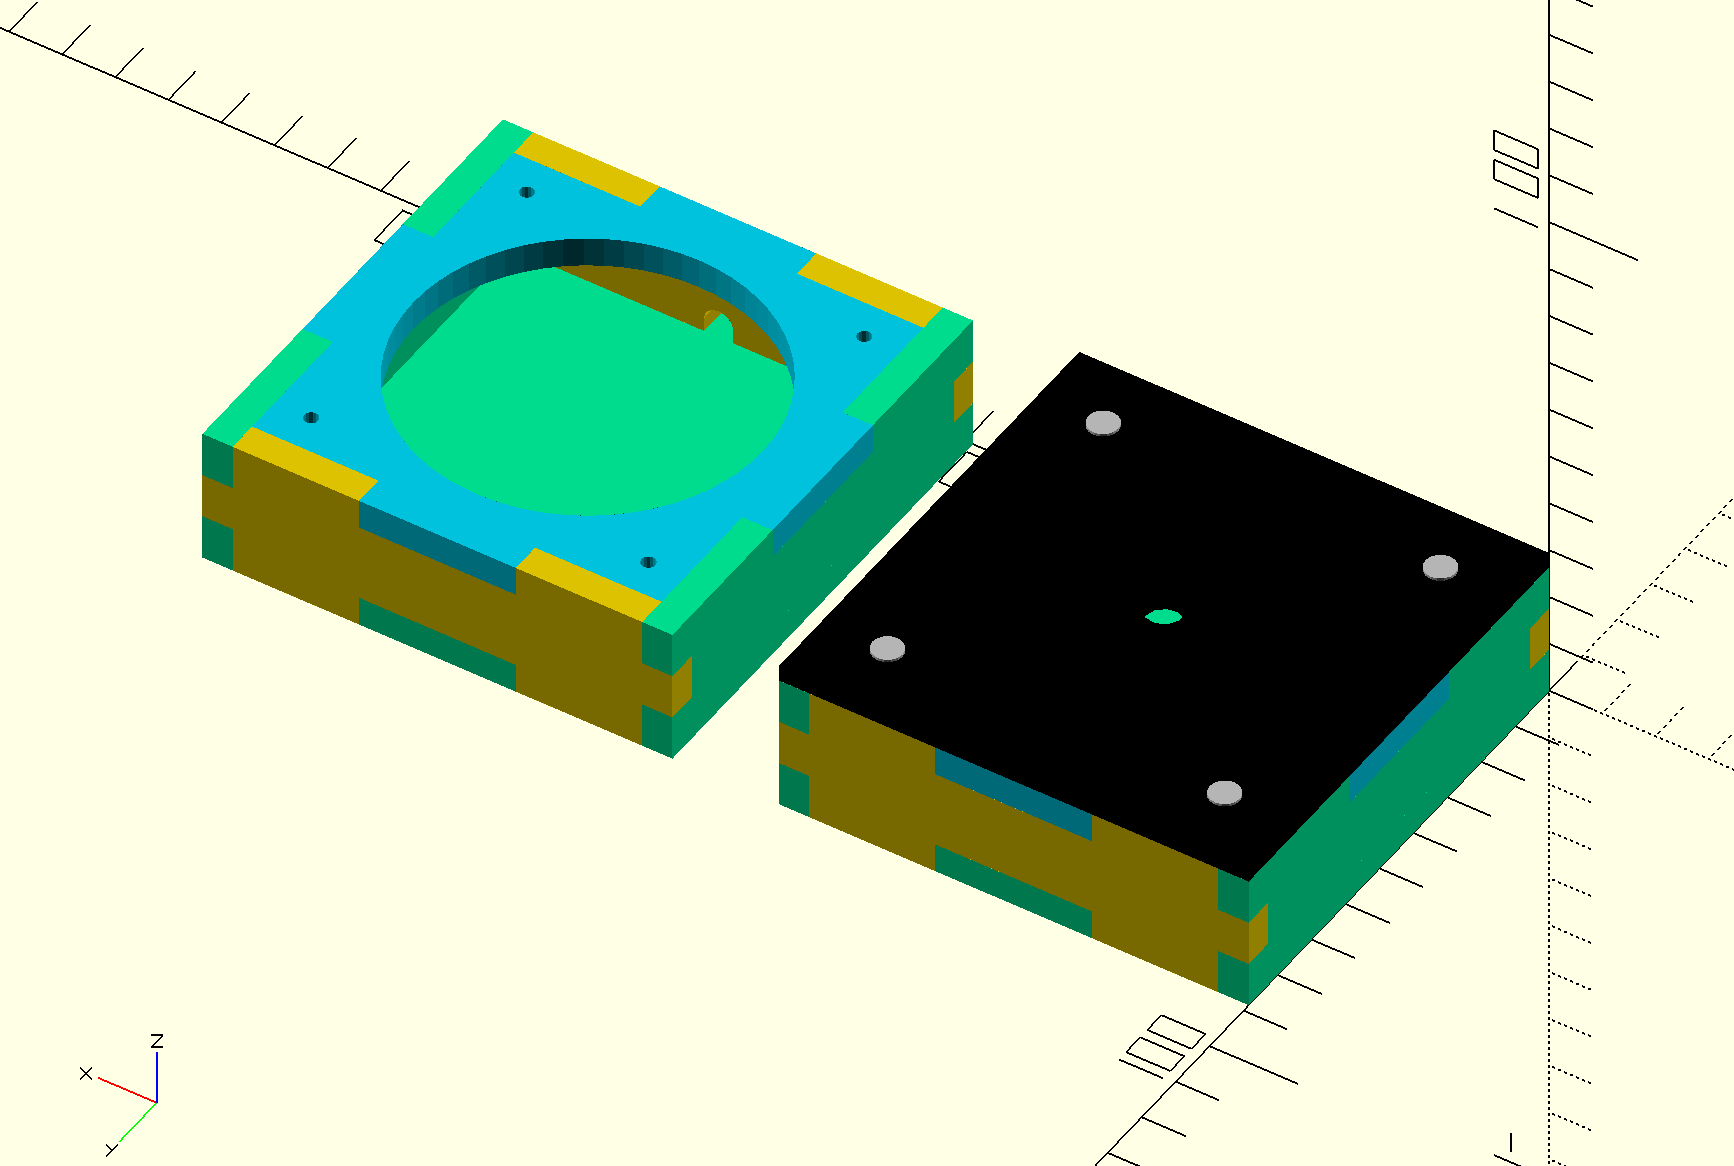 OpenSCAD render of knobbox v3 in 3d and 2d layout